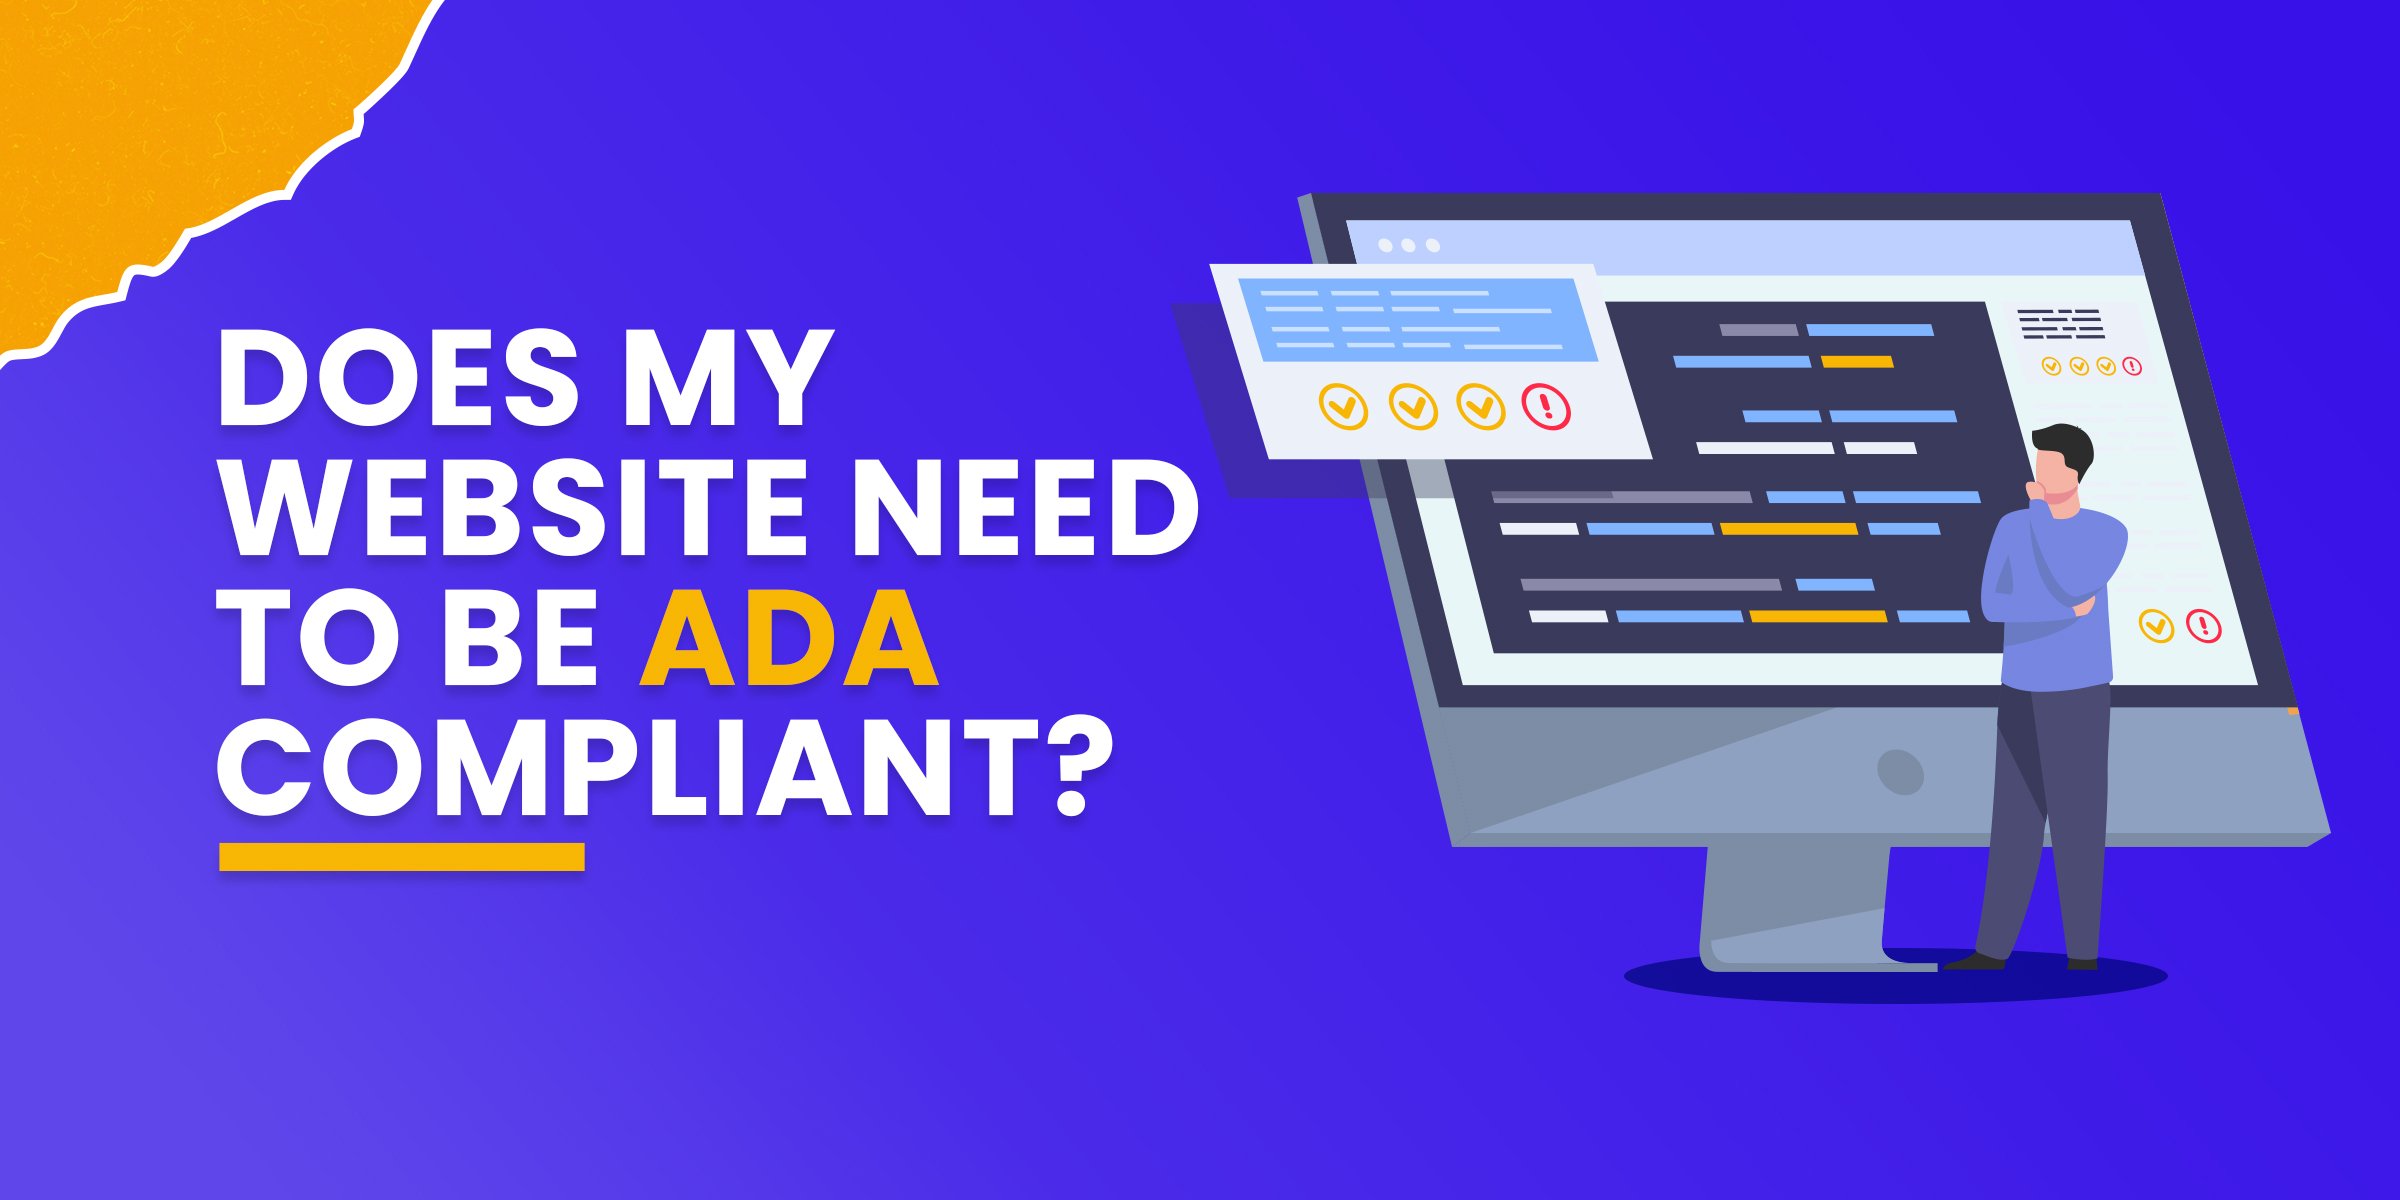 Does My Website Need to be ADA Compliant?